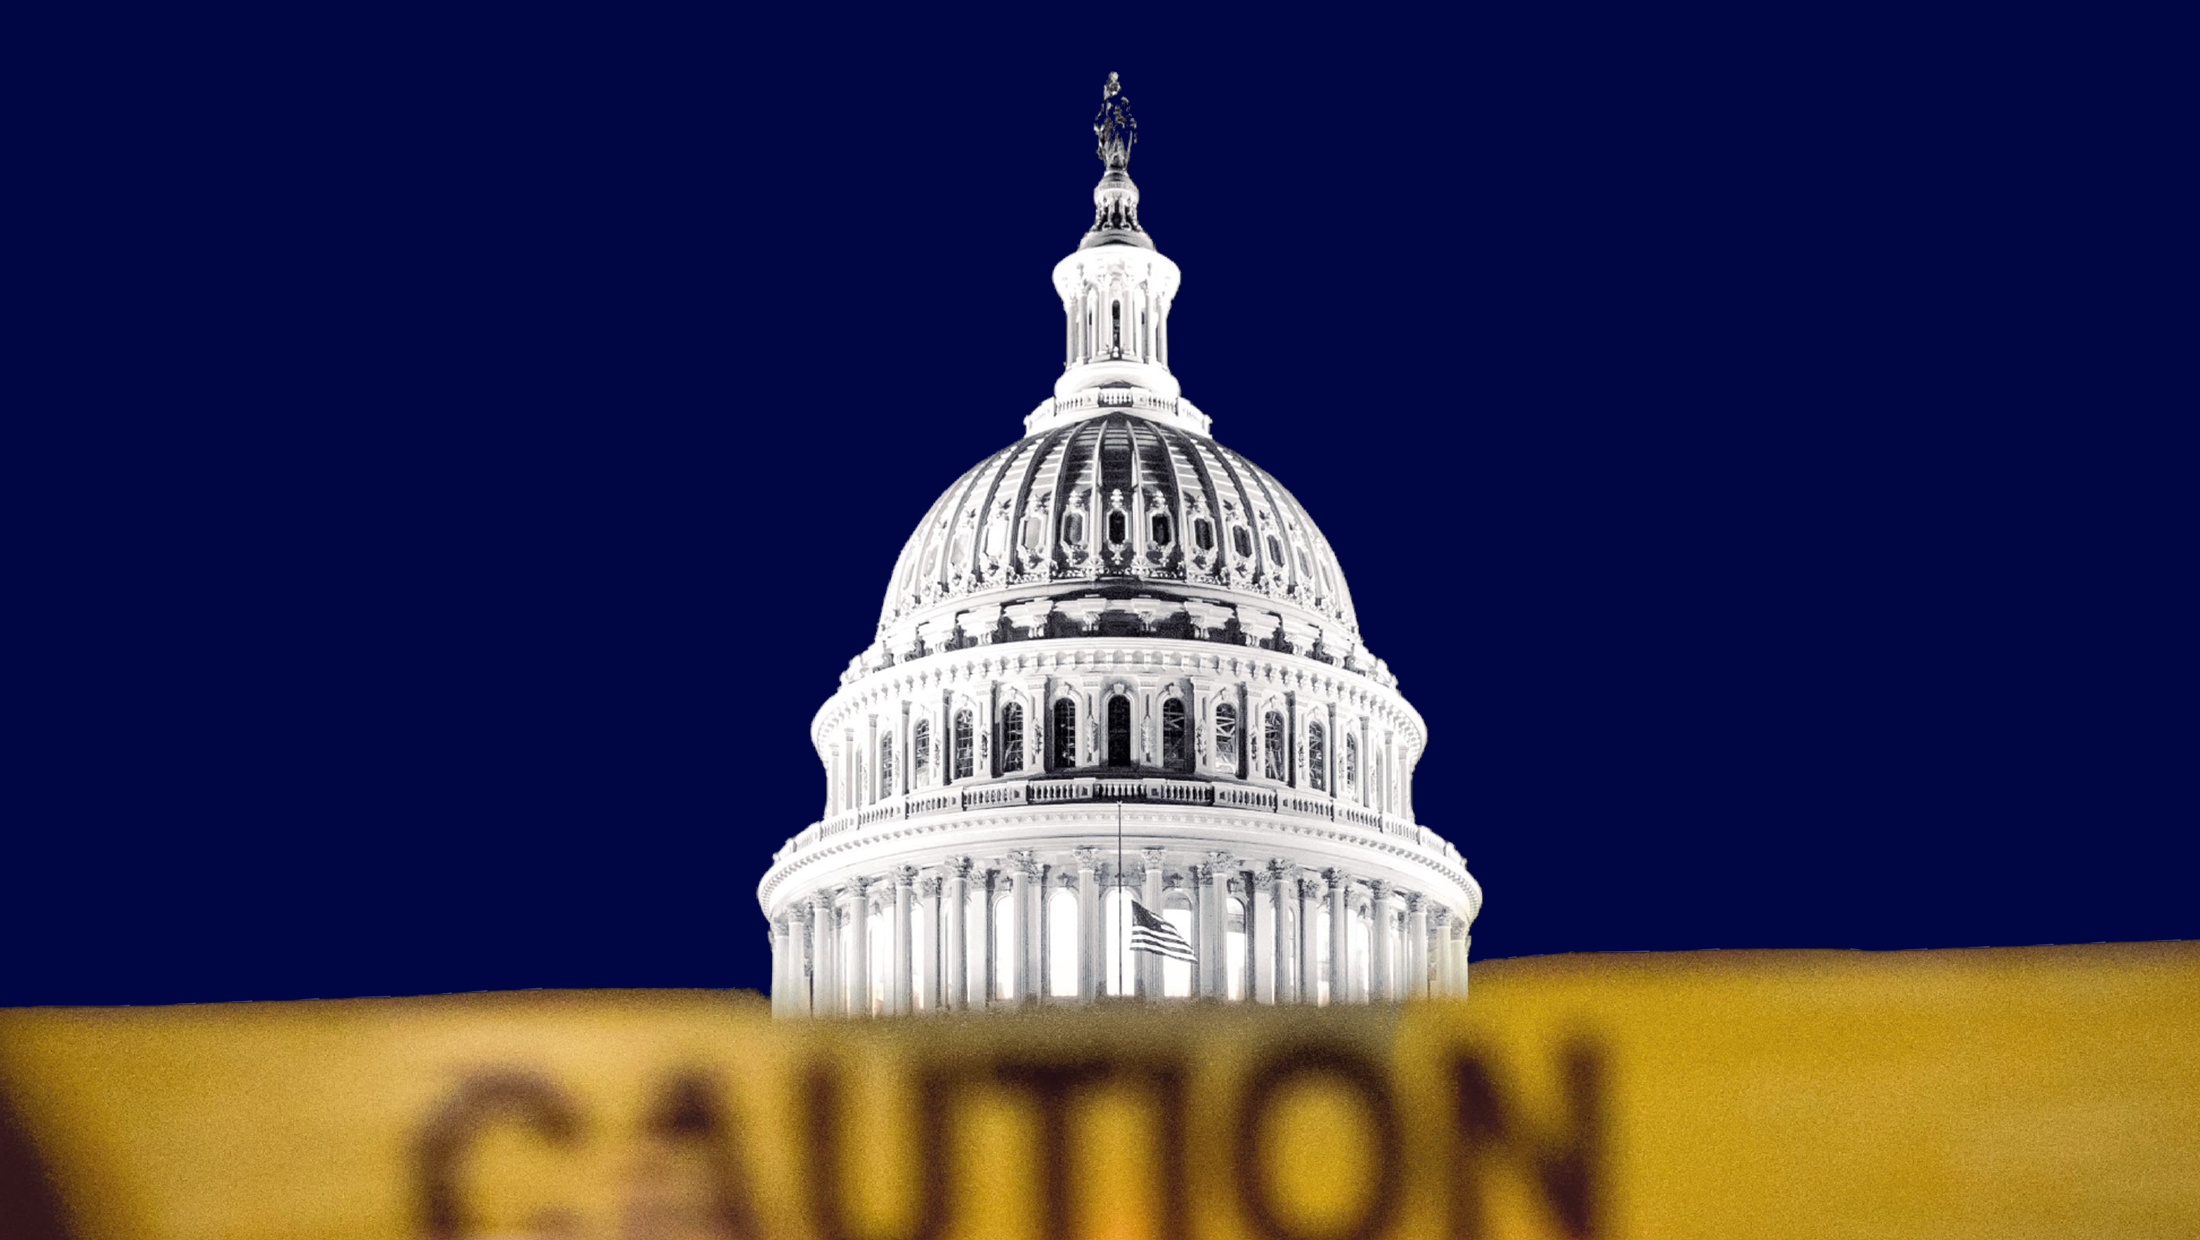 The U.S. Capitol obstructed by blurred yellow caution tape